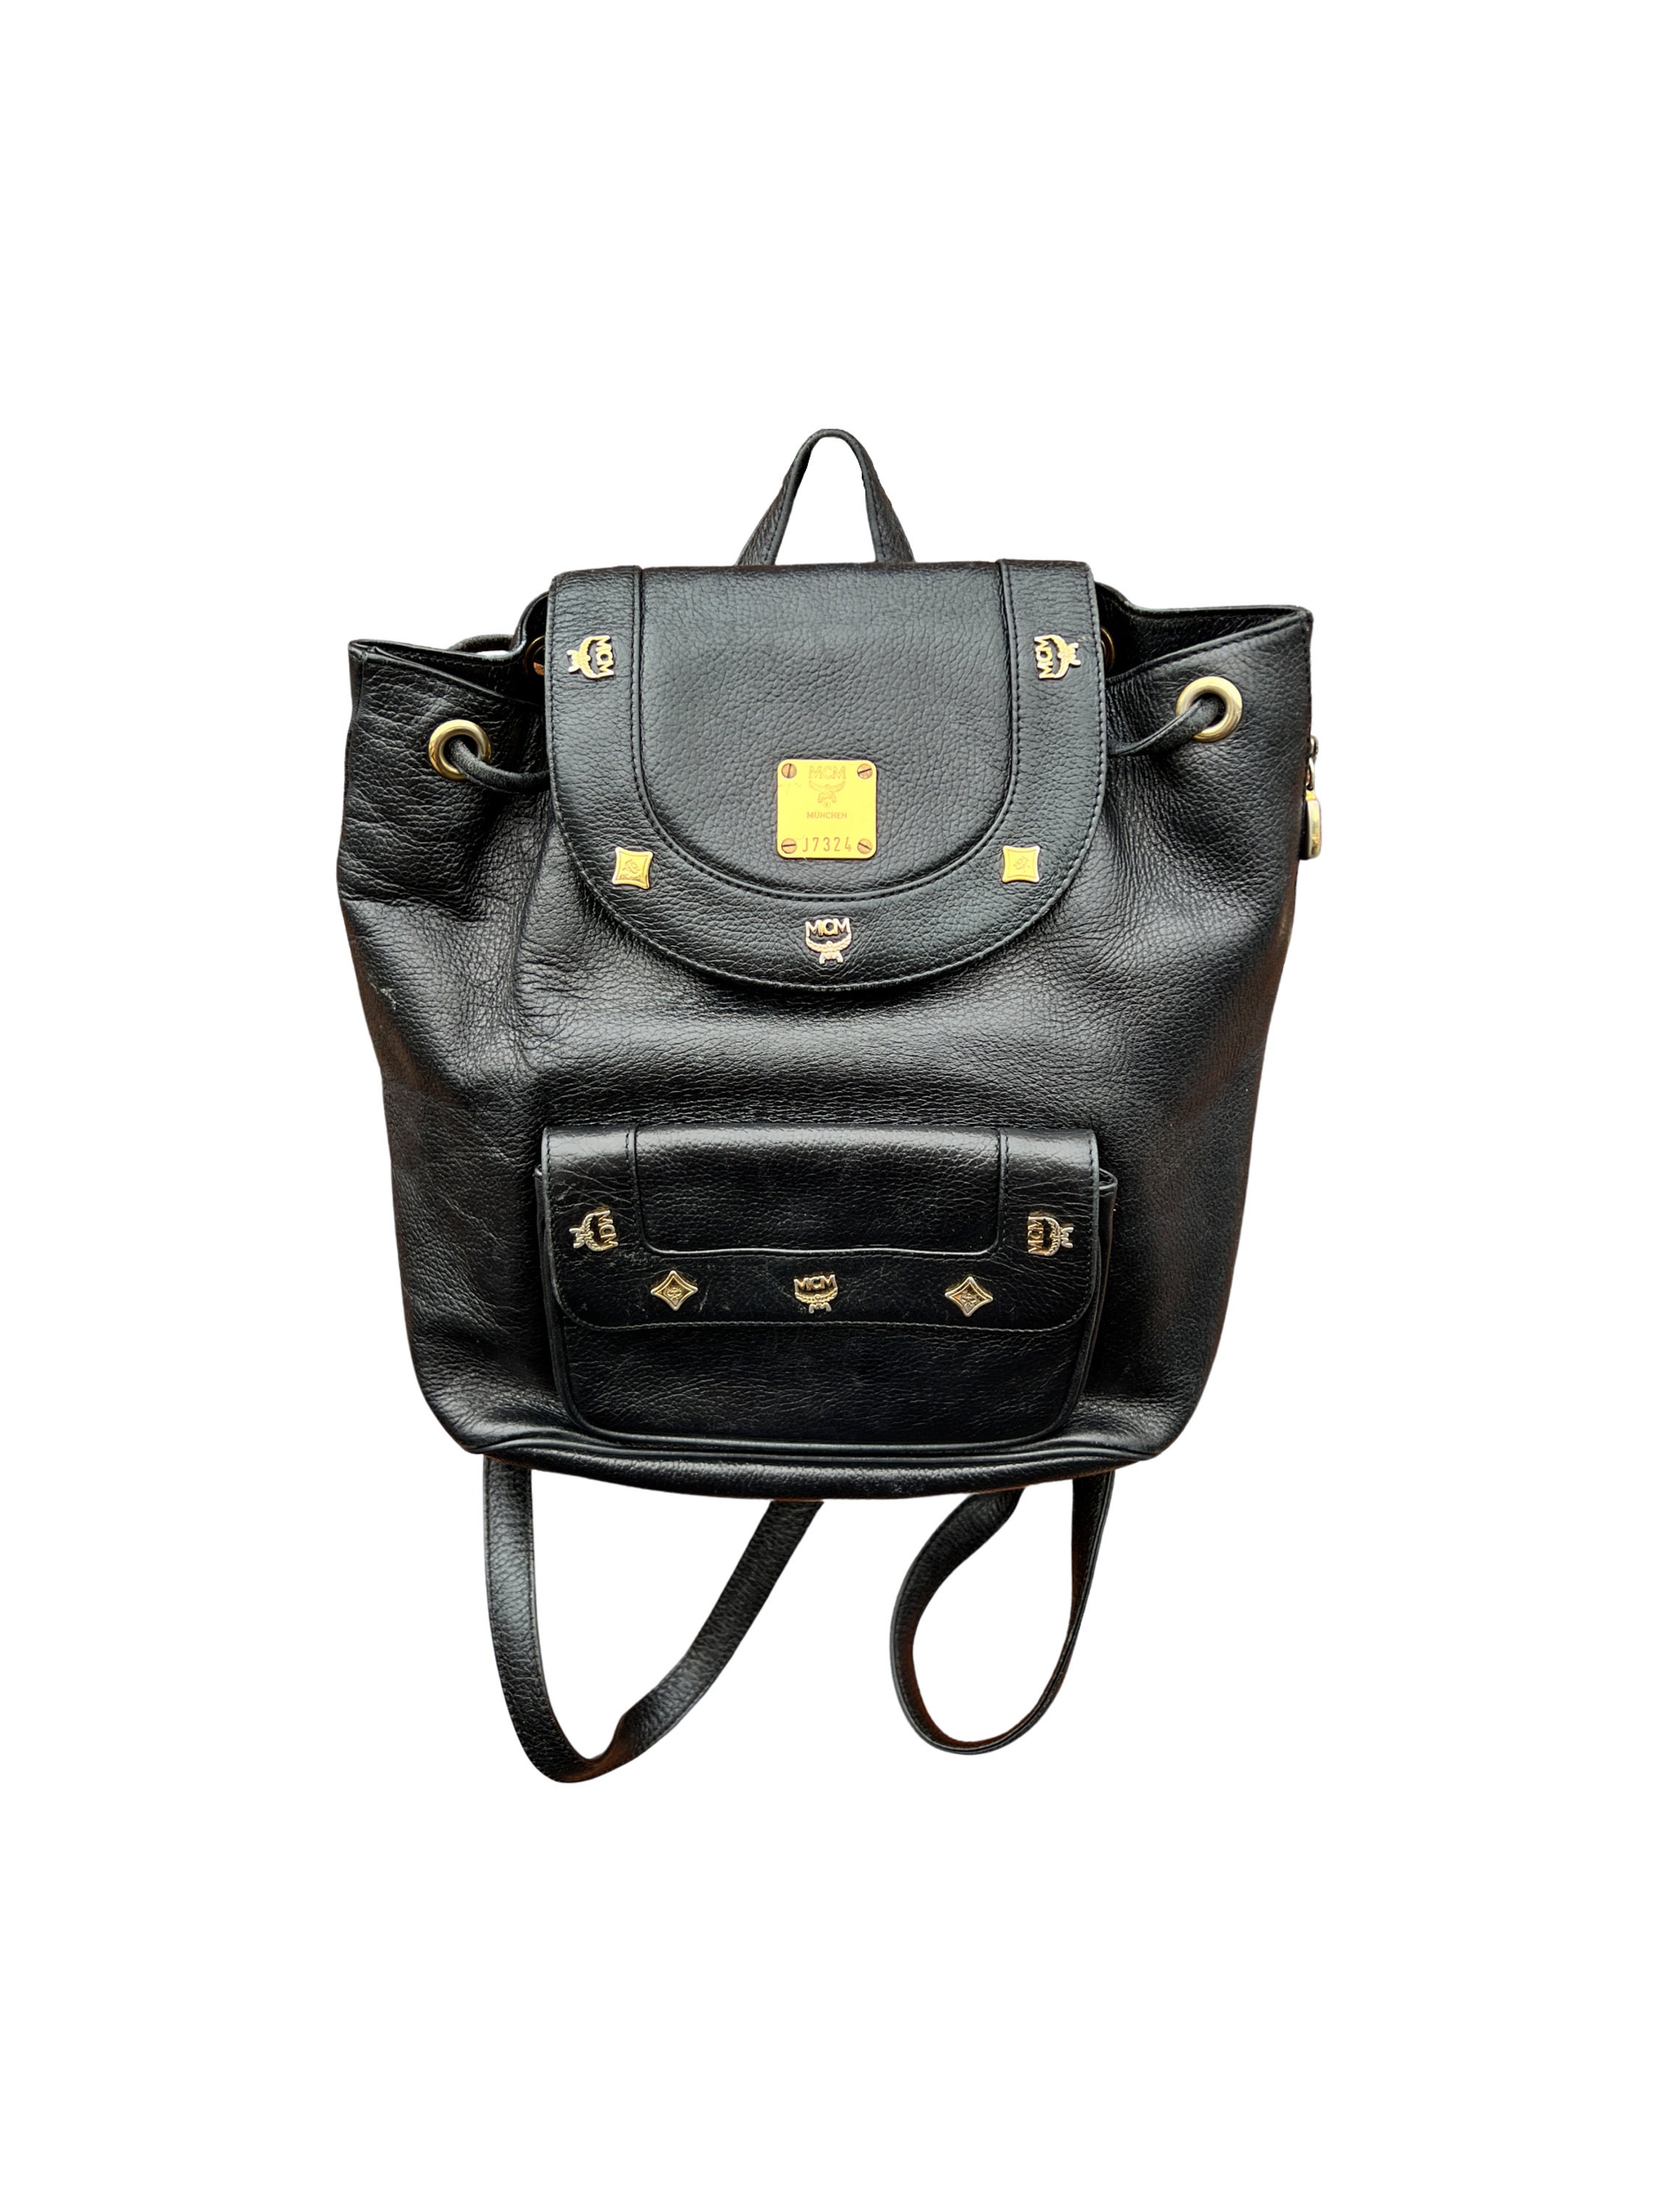 MCM, Bags, Authentic Mcm Black Leather Mini Backpack